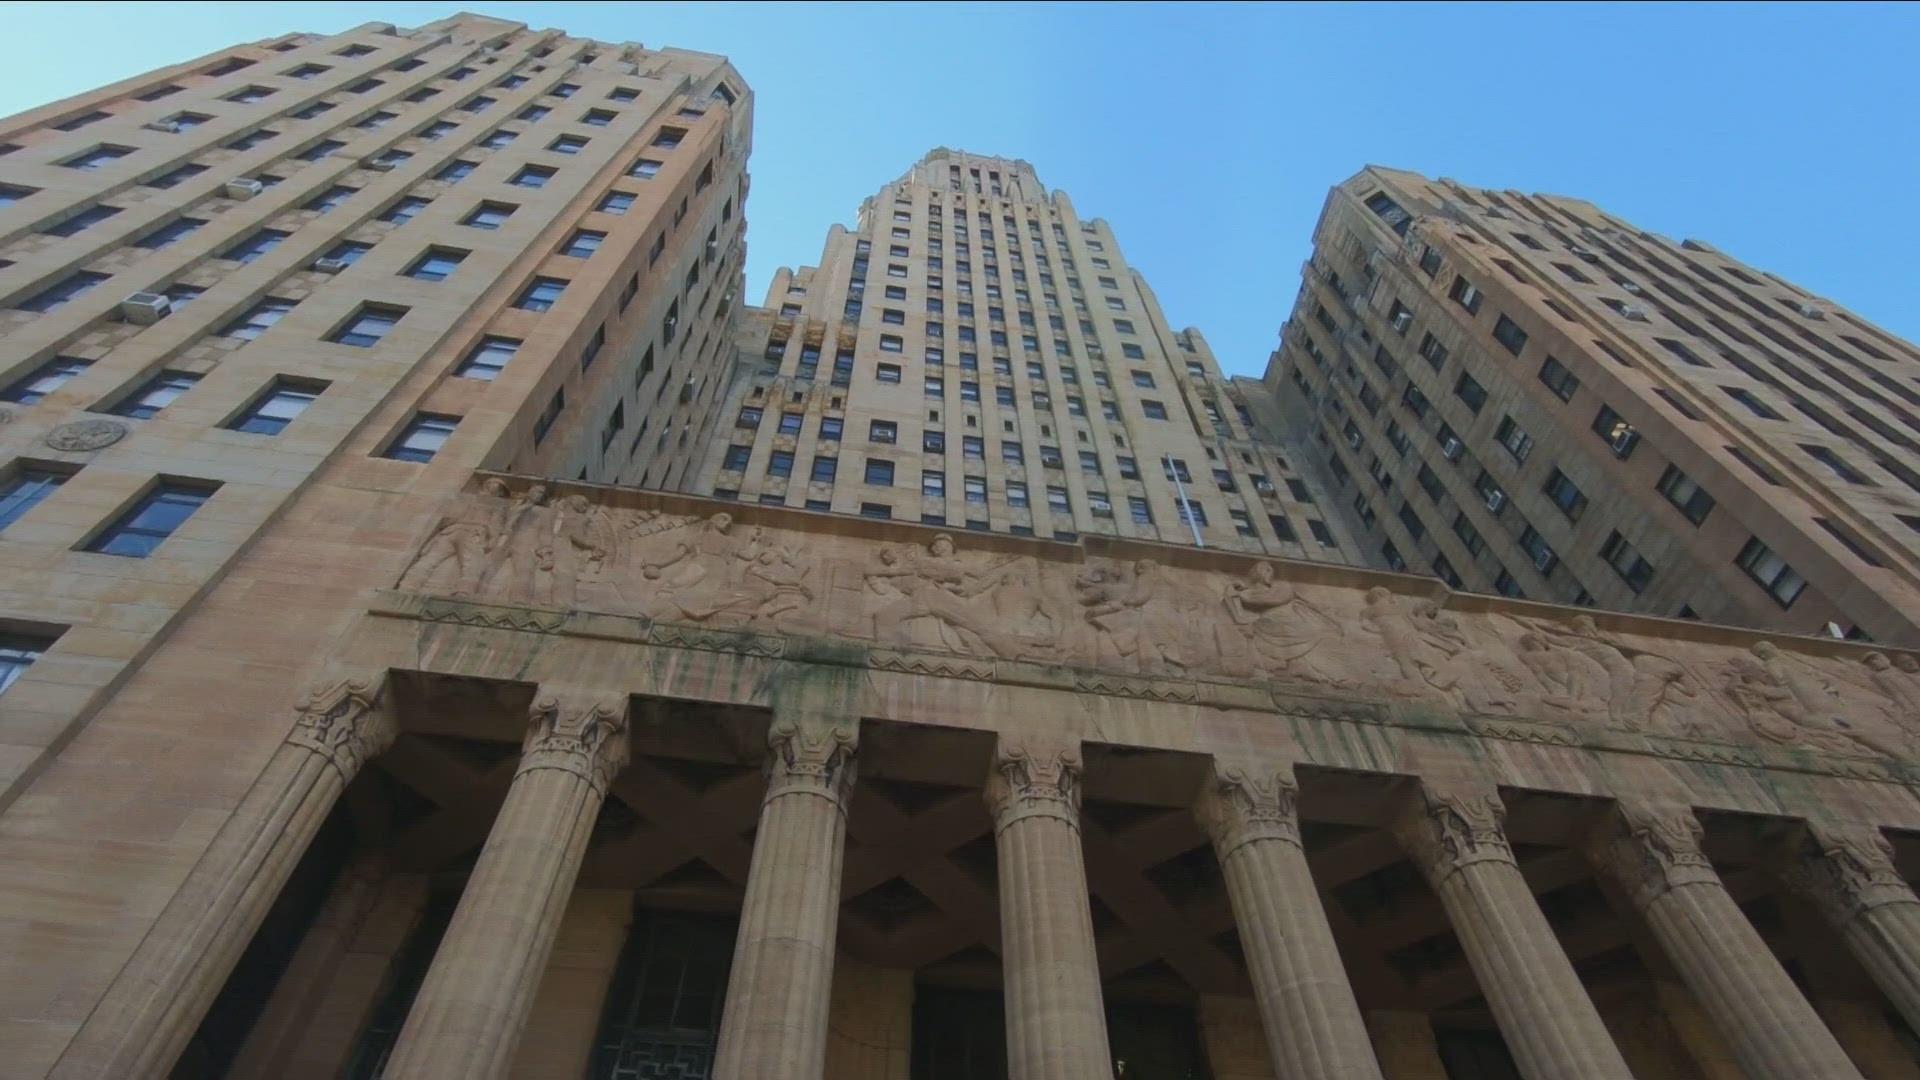 The Buffalo Common Council finance committee will meet to discuss paid leave